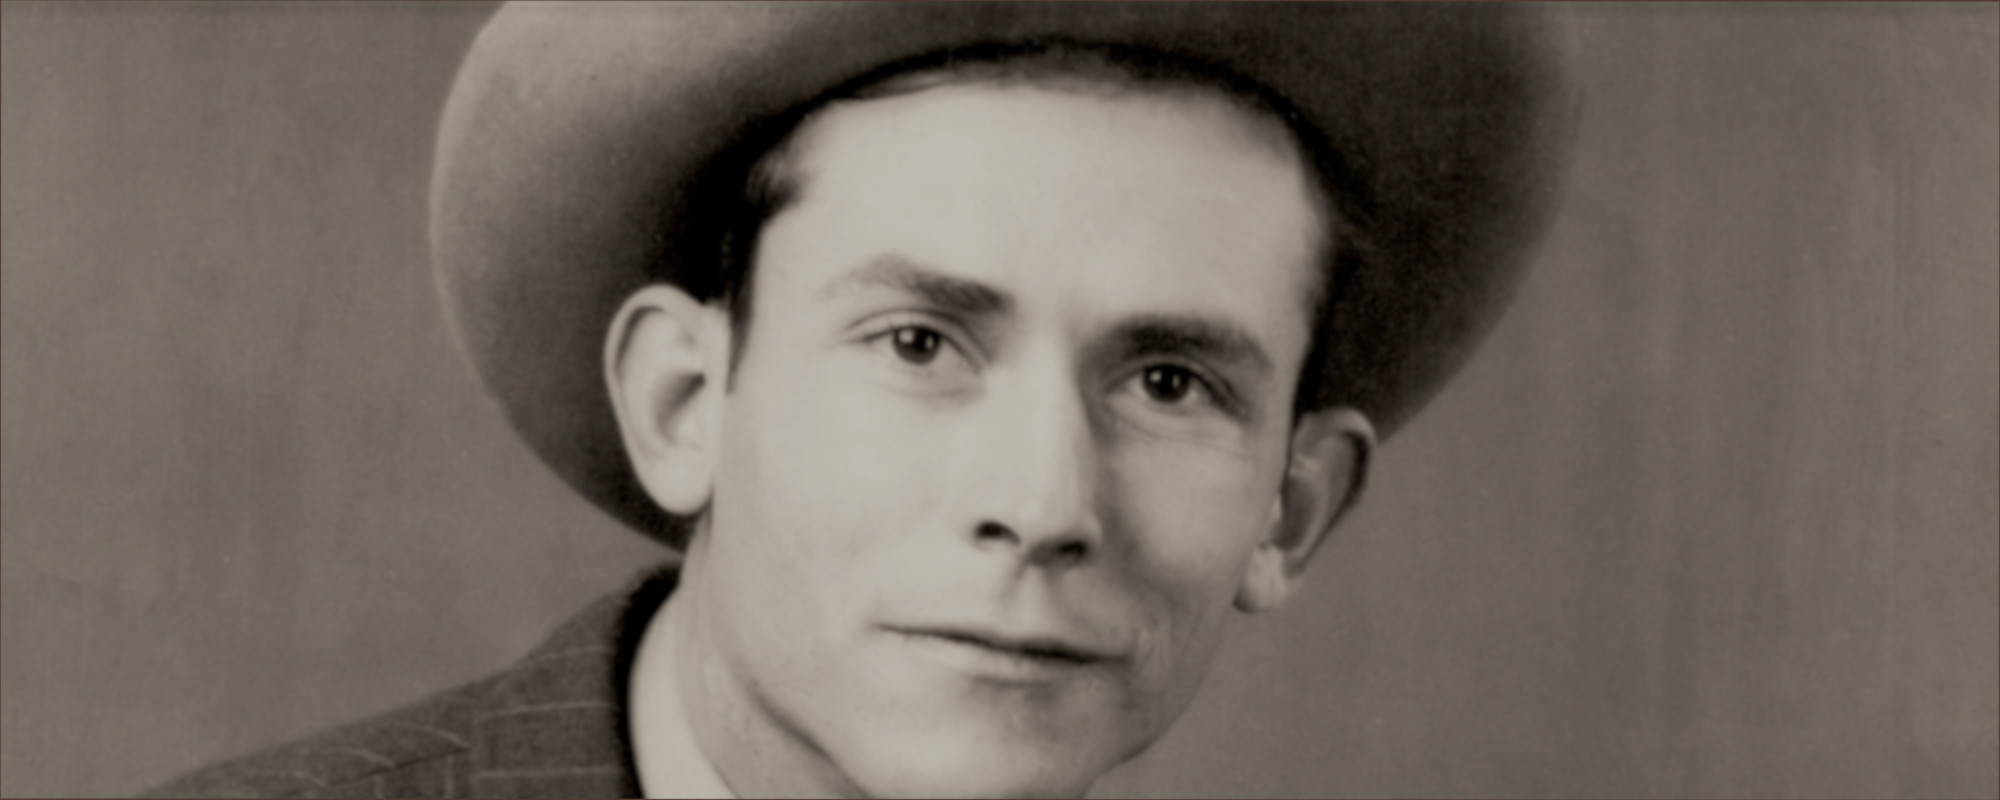 New Hank Williams Gospel Collection of Songs Set for March 11 Release